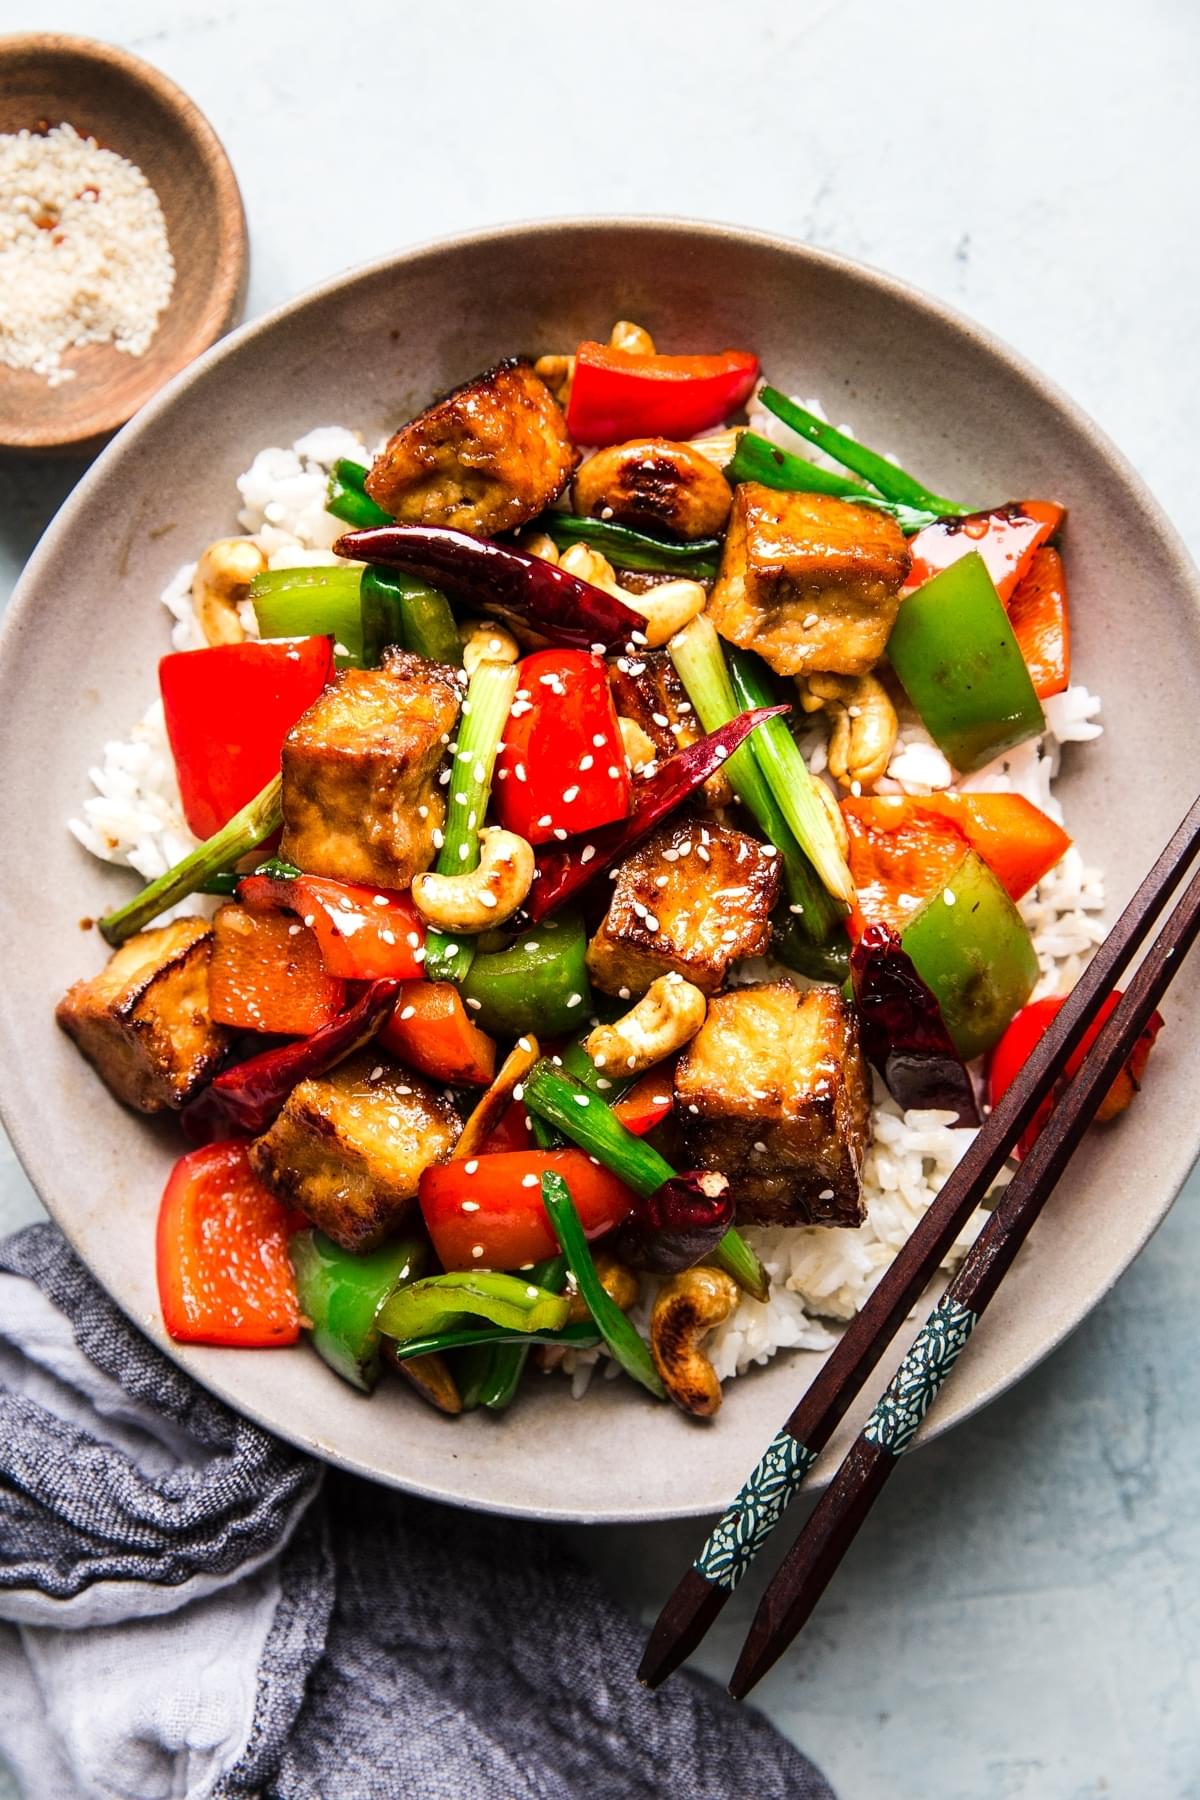 Kung Pao Tofu with red bell peppers, served over rice